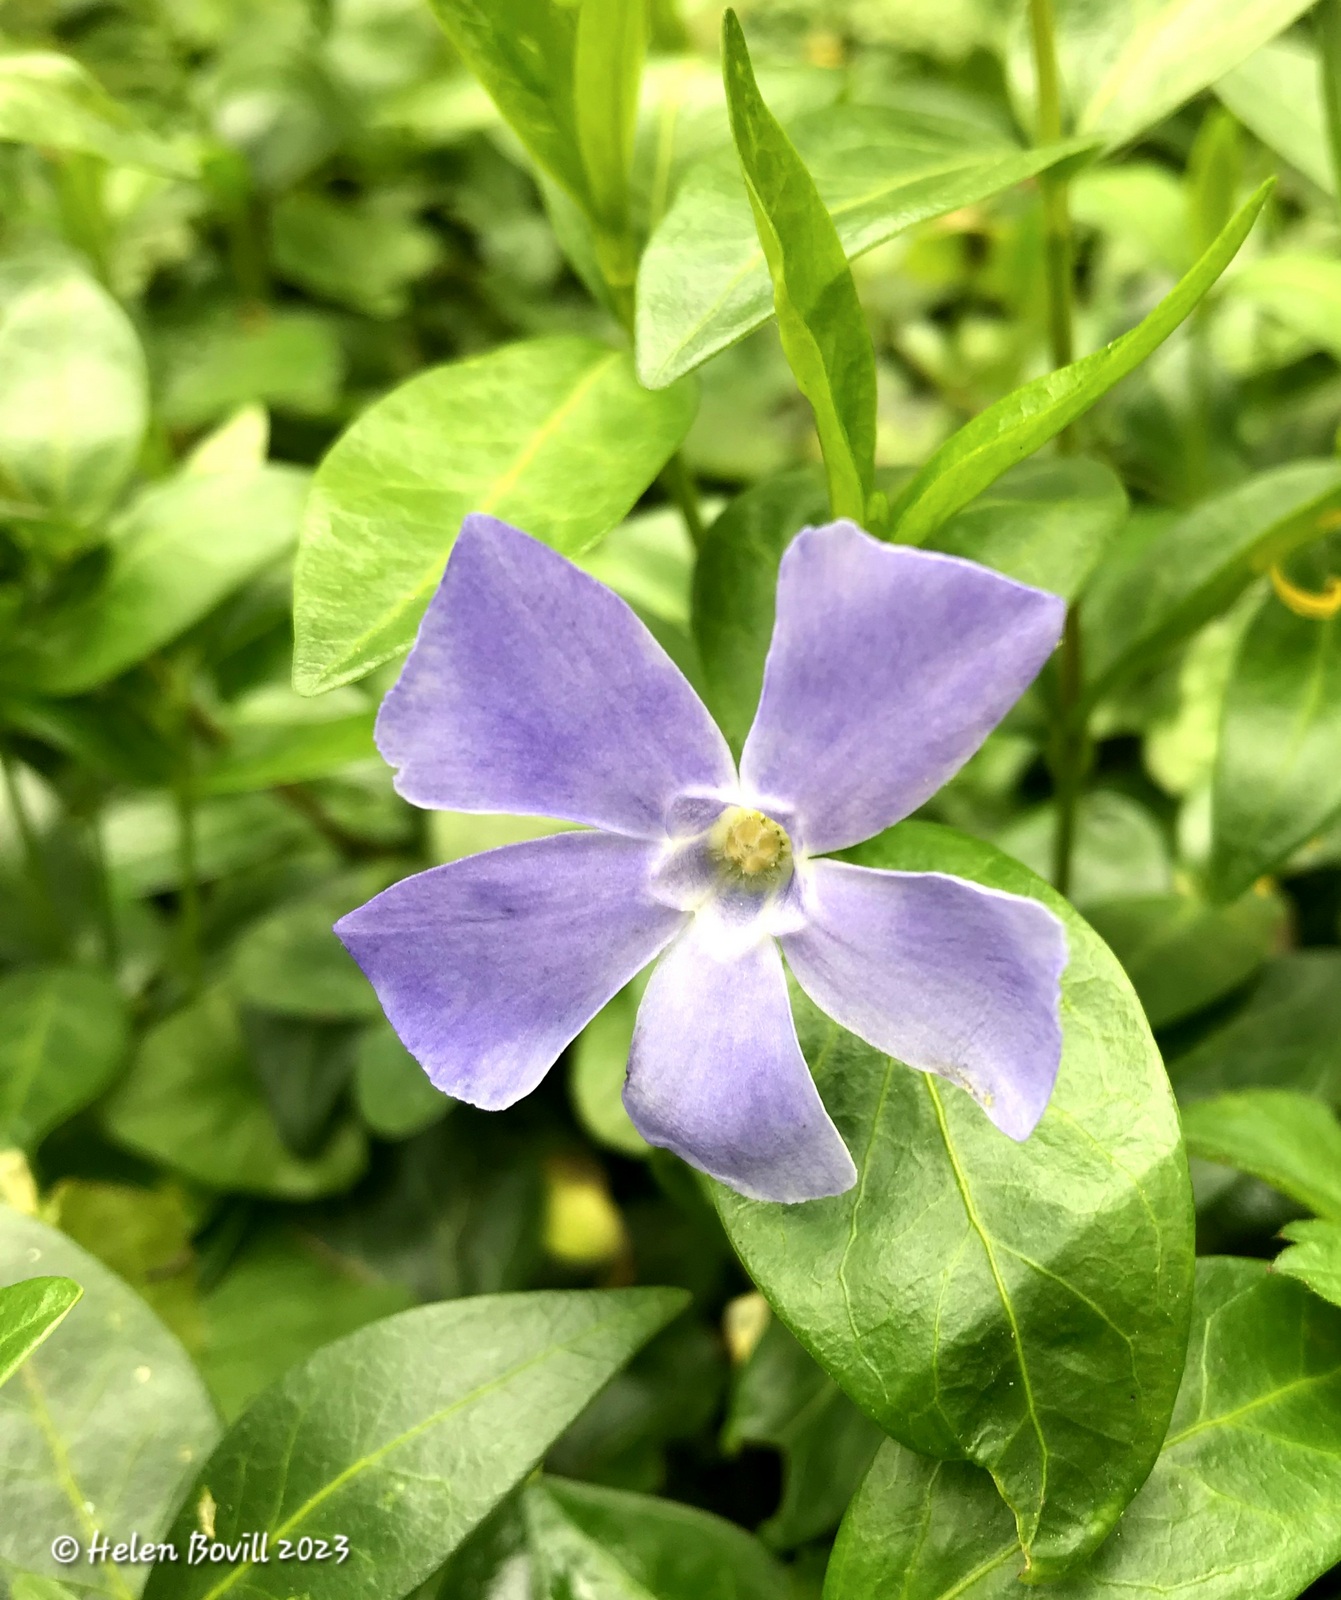 A blue Periwinkle flower and green foliage